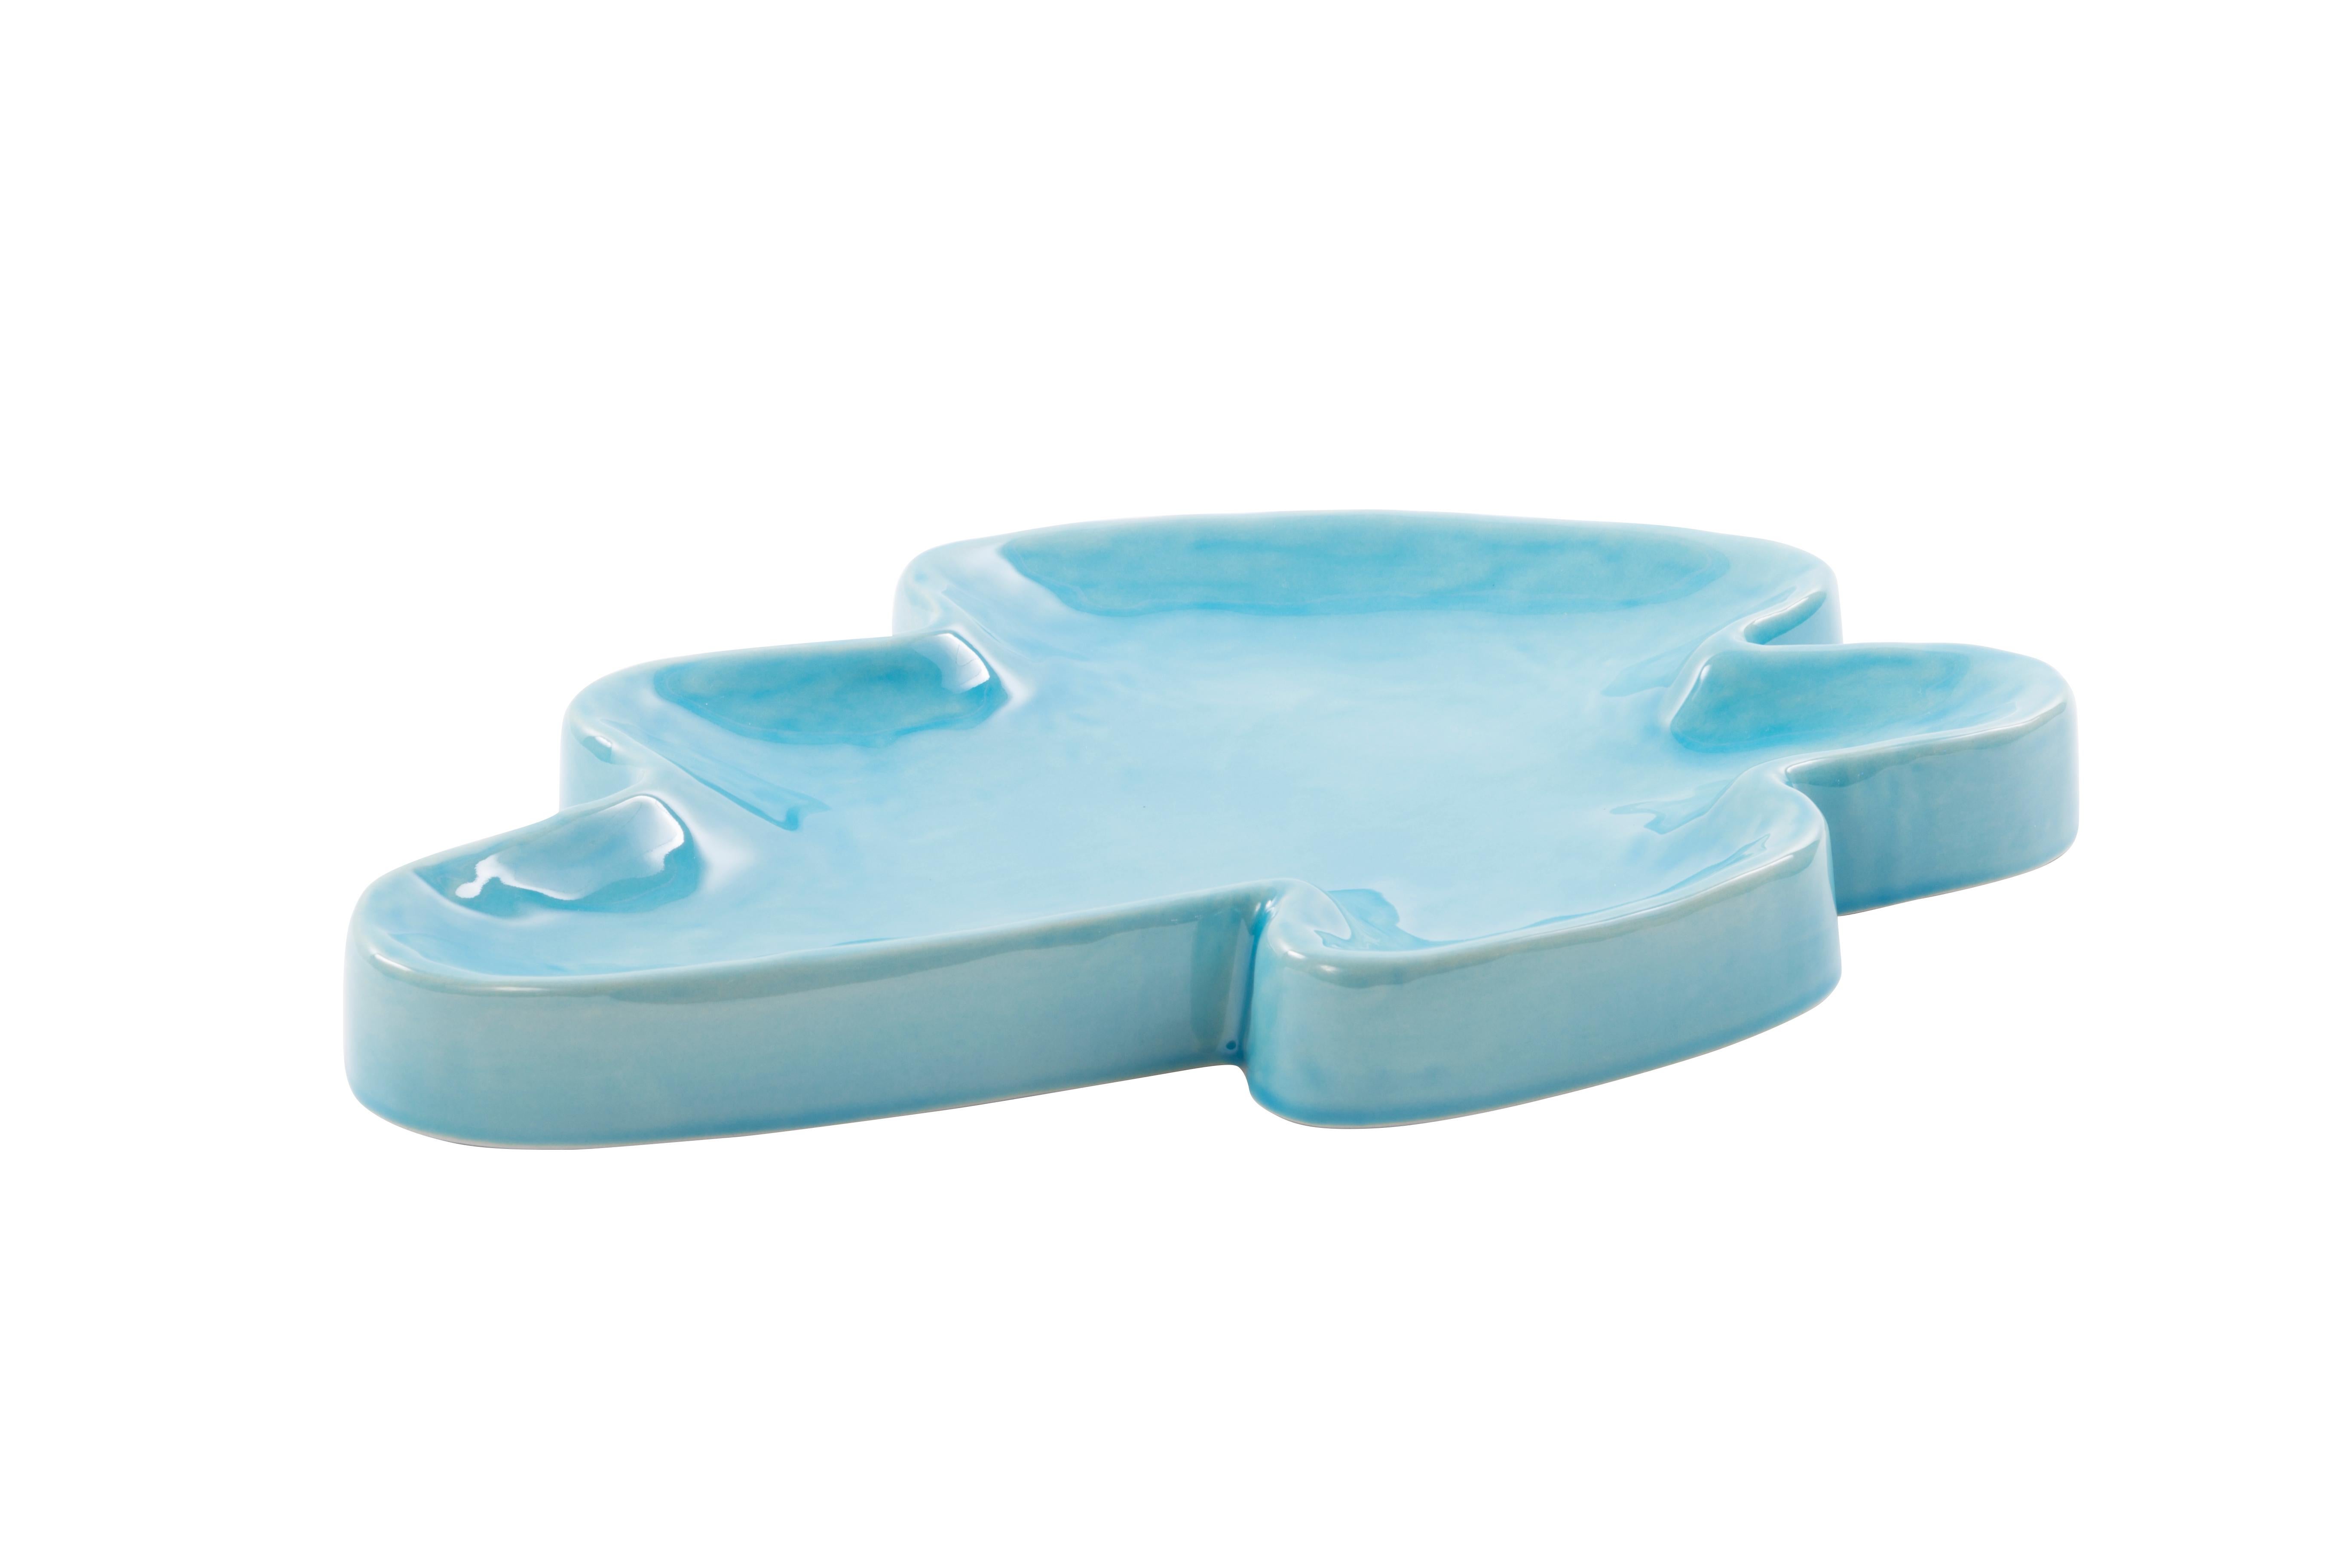 Lake big tropical turquoise tray by Pulpo
Dimensions: D41 x W24 x H4 cm
Materials: ceramic

Also available in different colours. 

These charming additions allow you to create a true tablescape environment; from the tones and textures of the